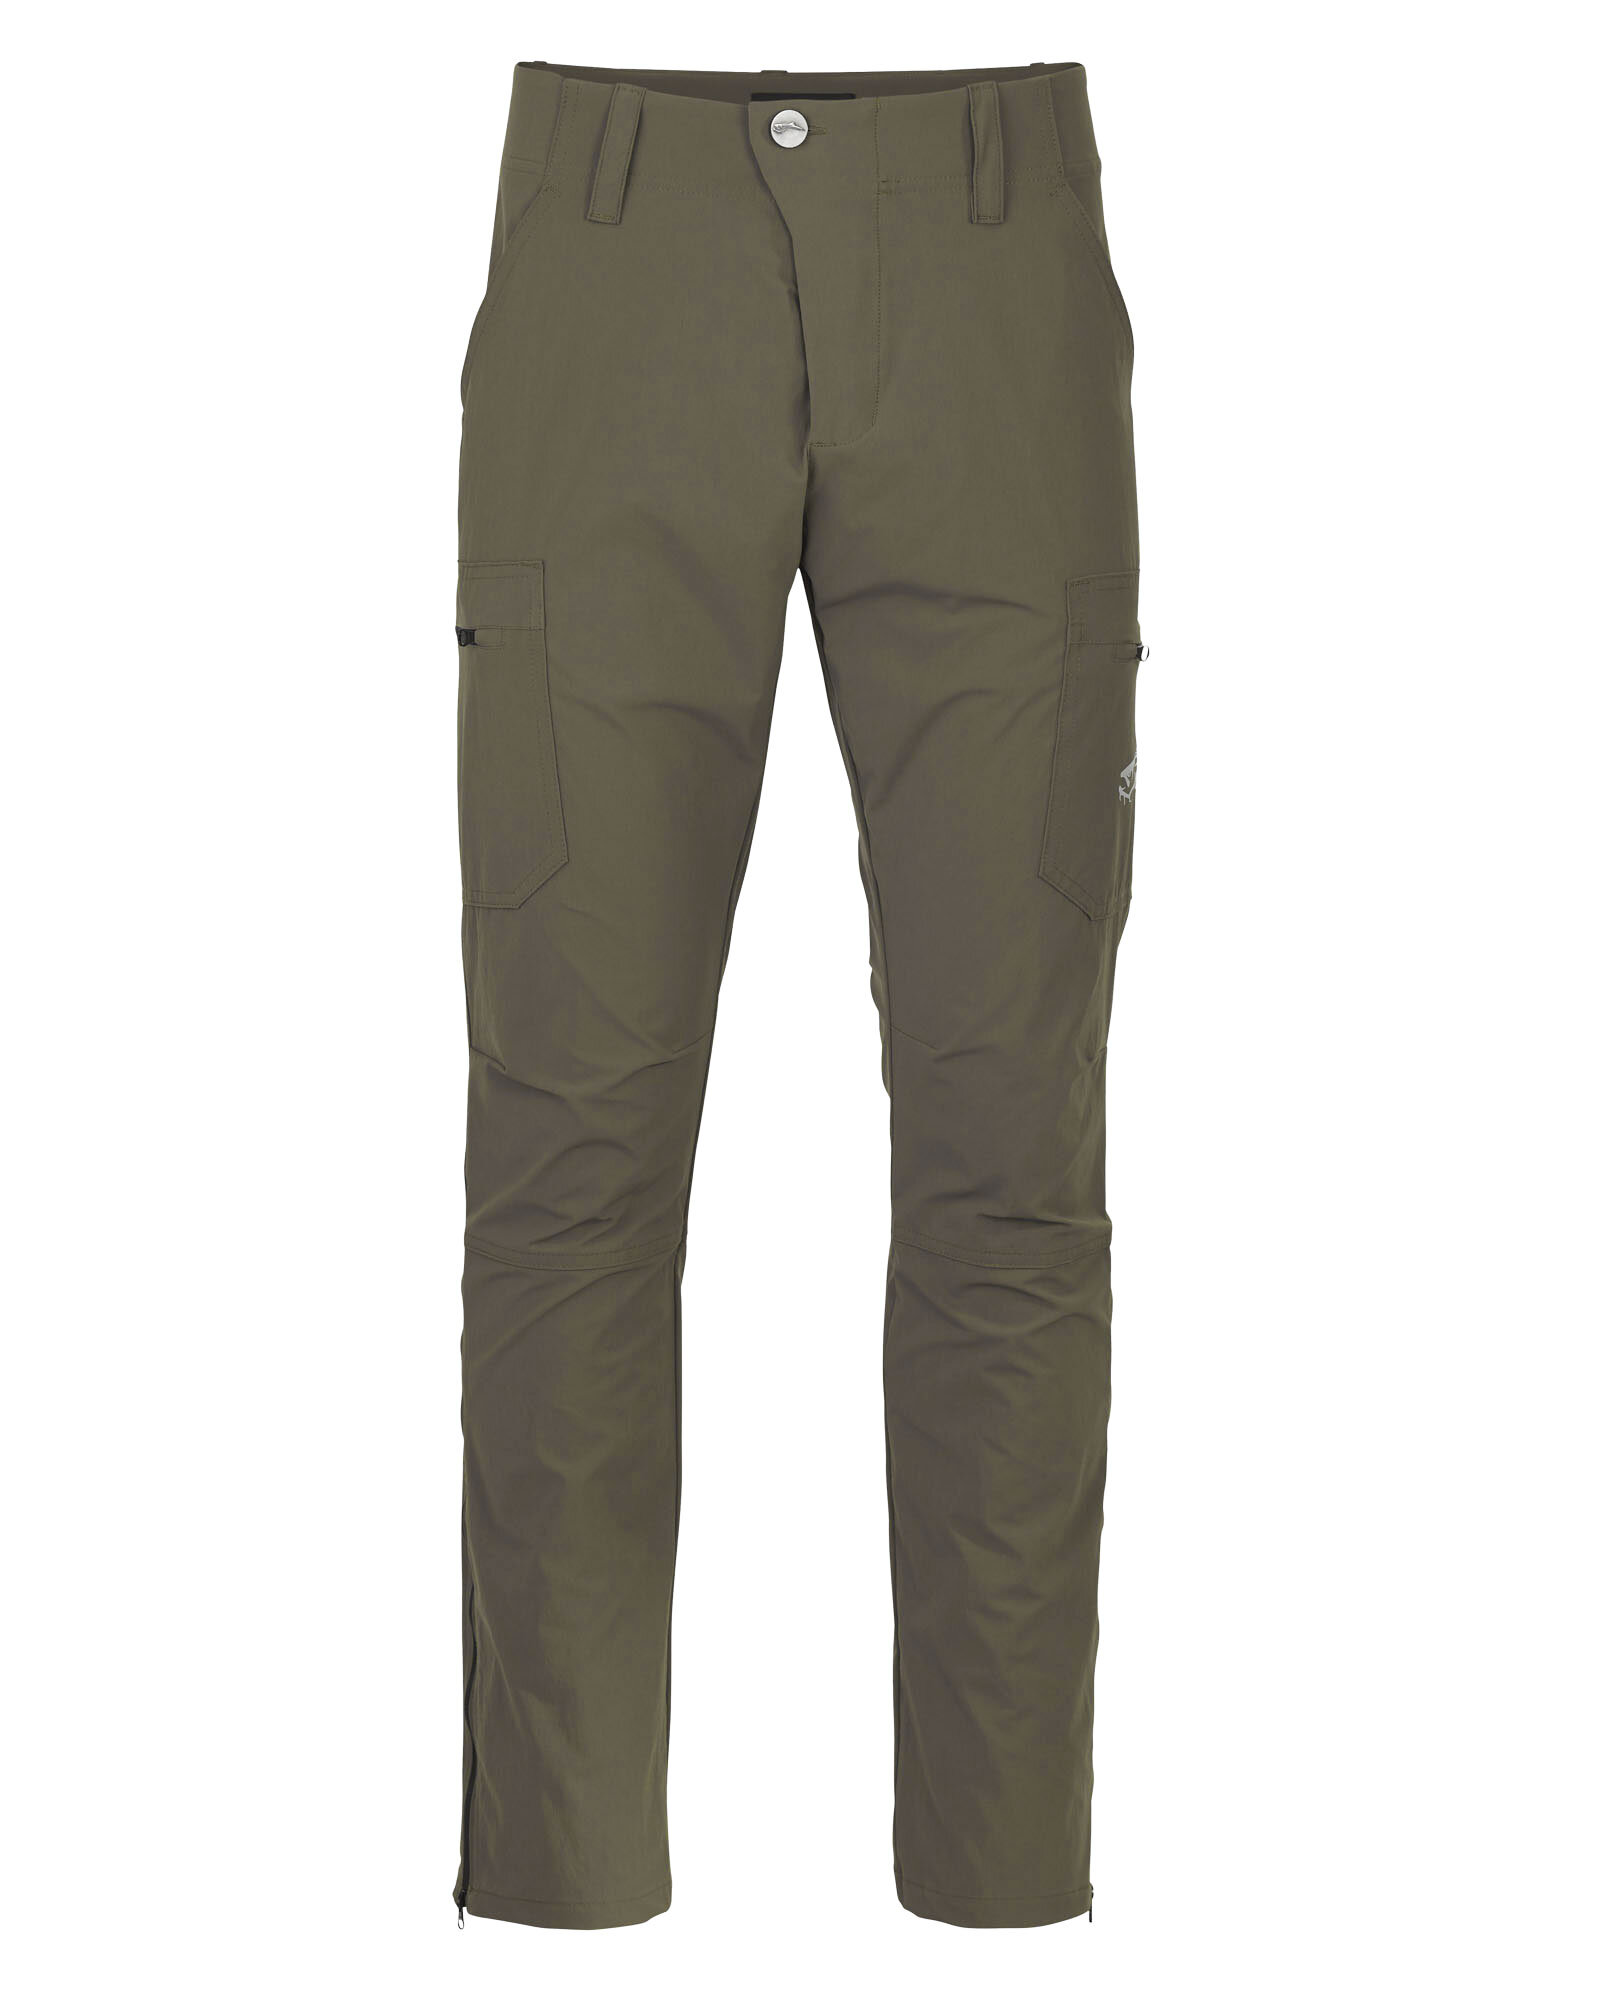 Pursuit Pants  Olive - Bow and Rod